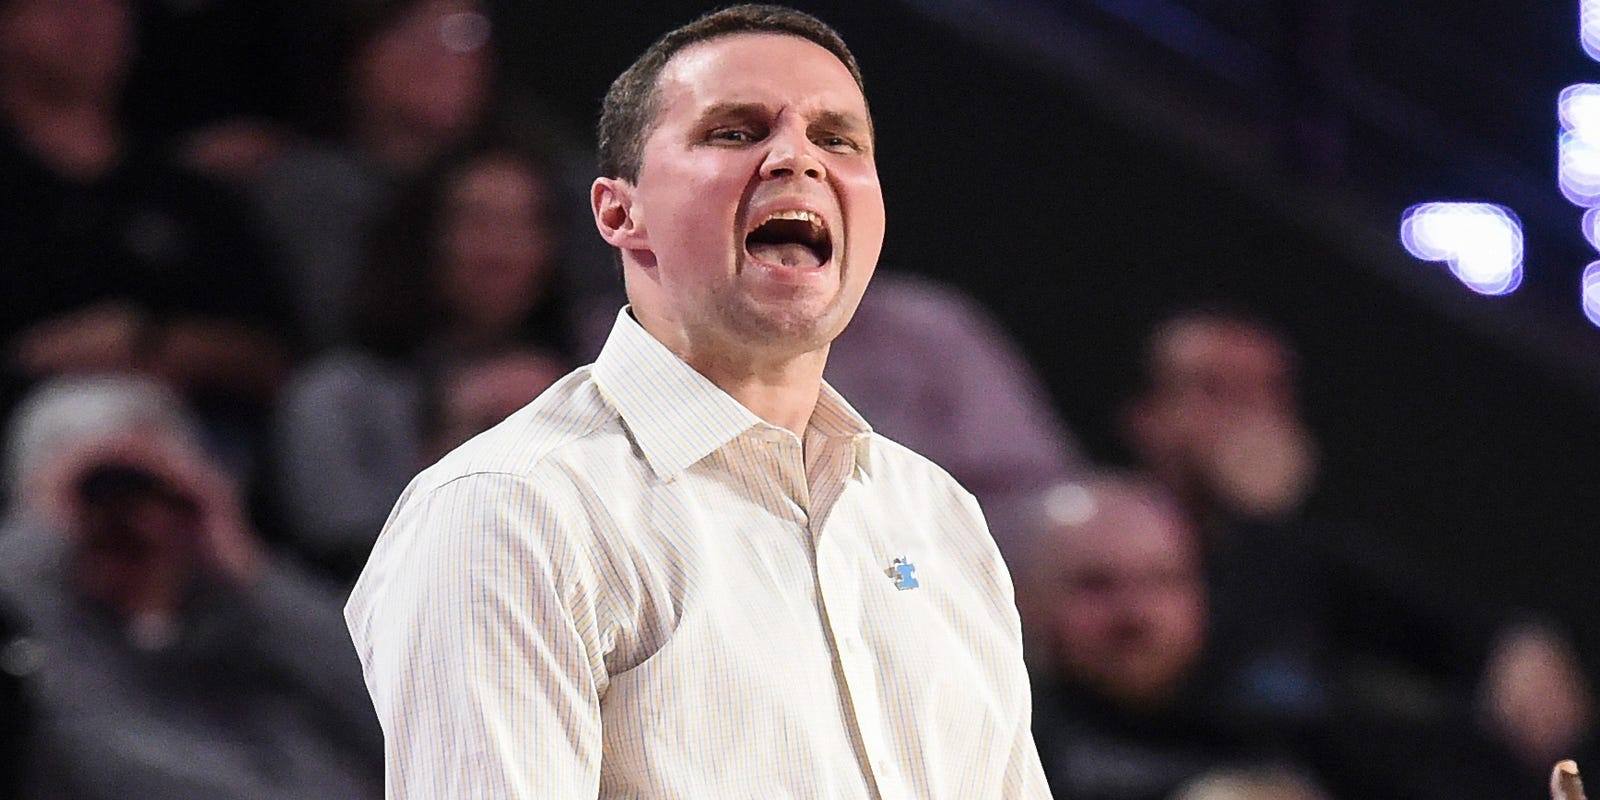 LSU basketball coach Will Wade loses more than $400,000 in bonuses, pay